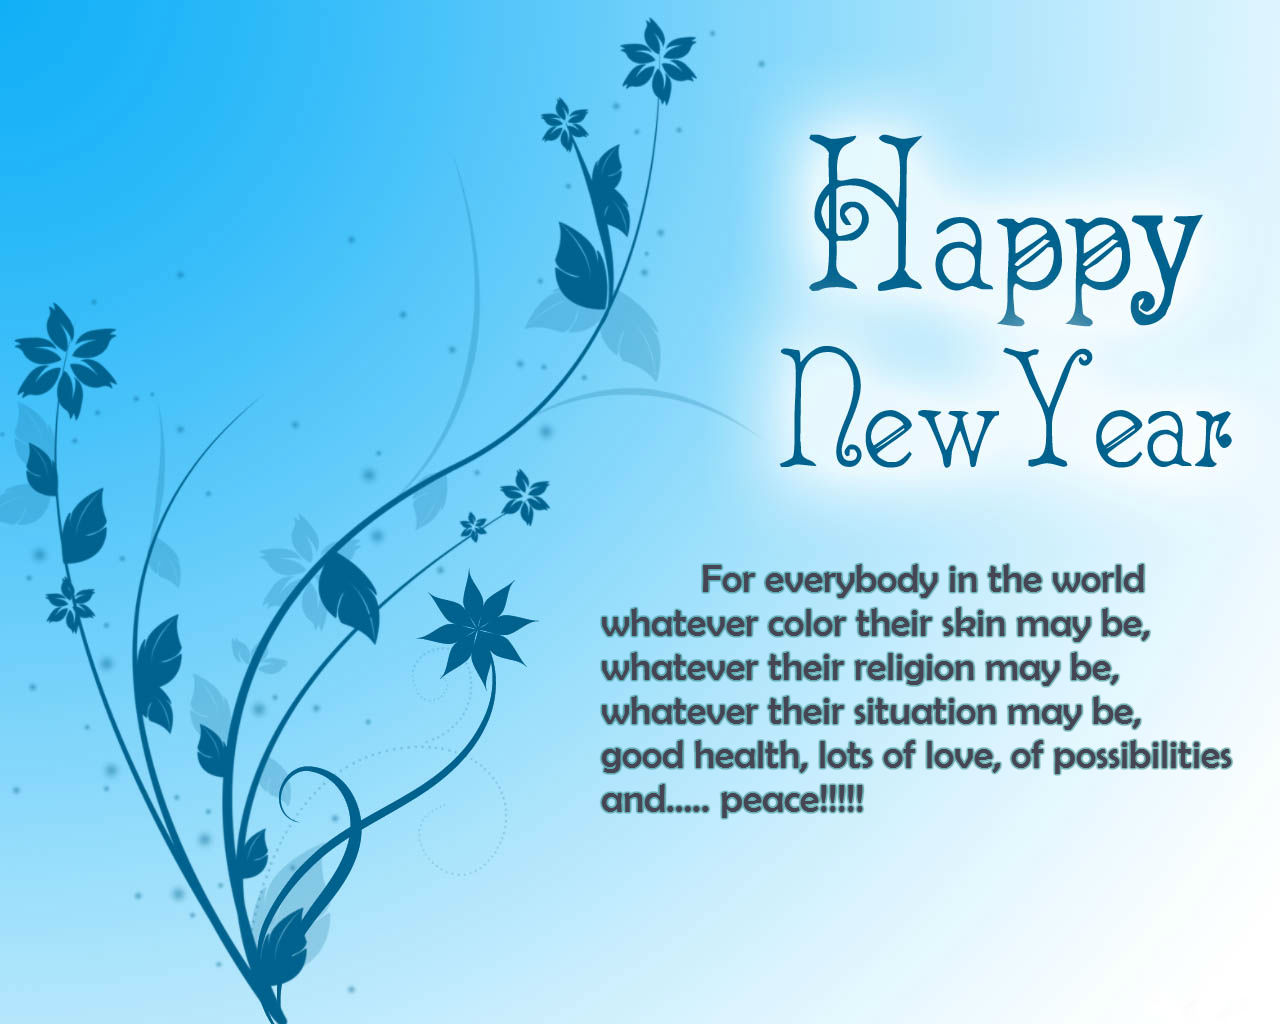 2013 New Year Wishes Wallpapers And Sms